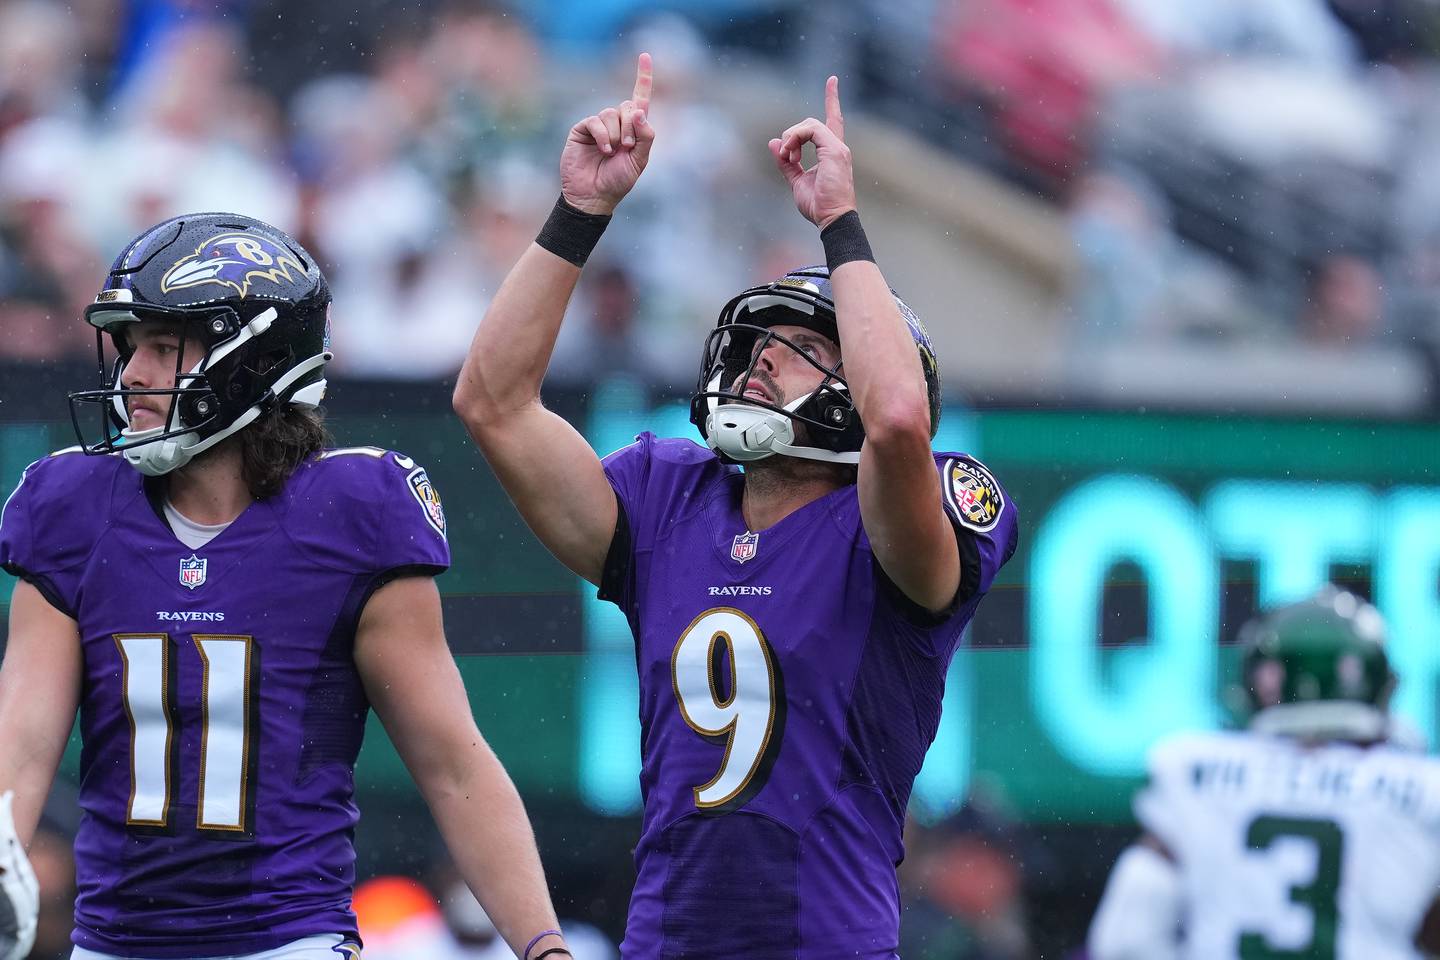 Justin Tucker #9 of the Baltimore Ravens reacts after making a field goal in the first quarter of the game at MetLife Stadium on September 11, 2022 in East Rutherford, New Jersey.